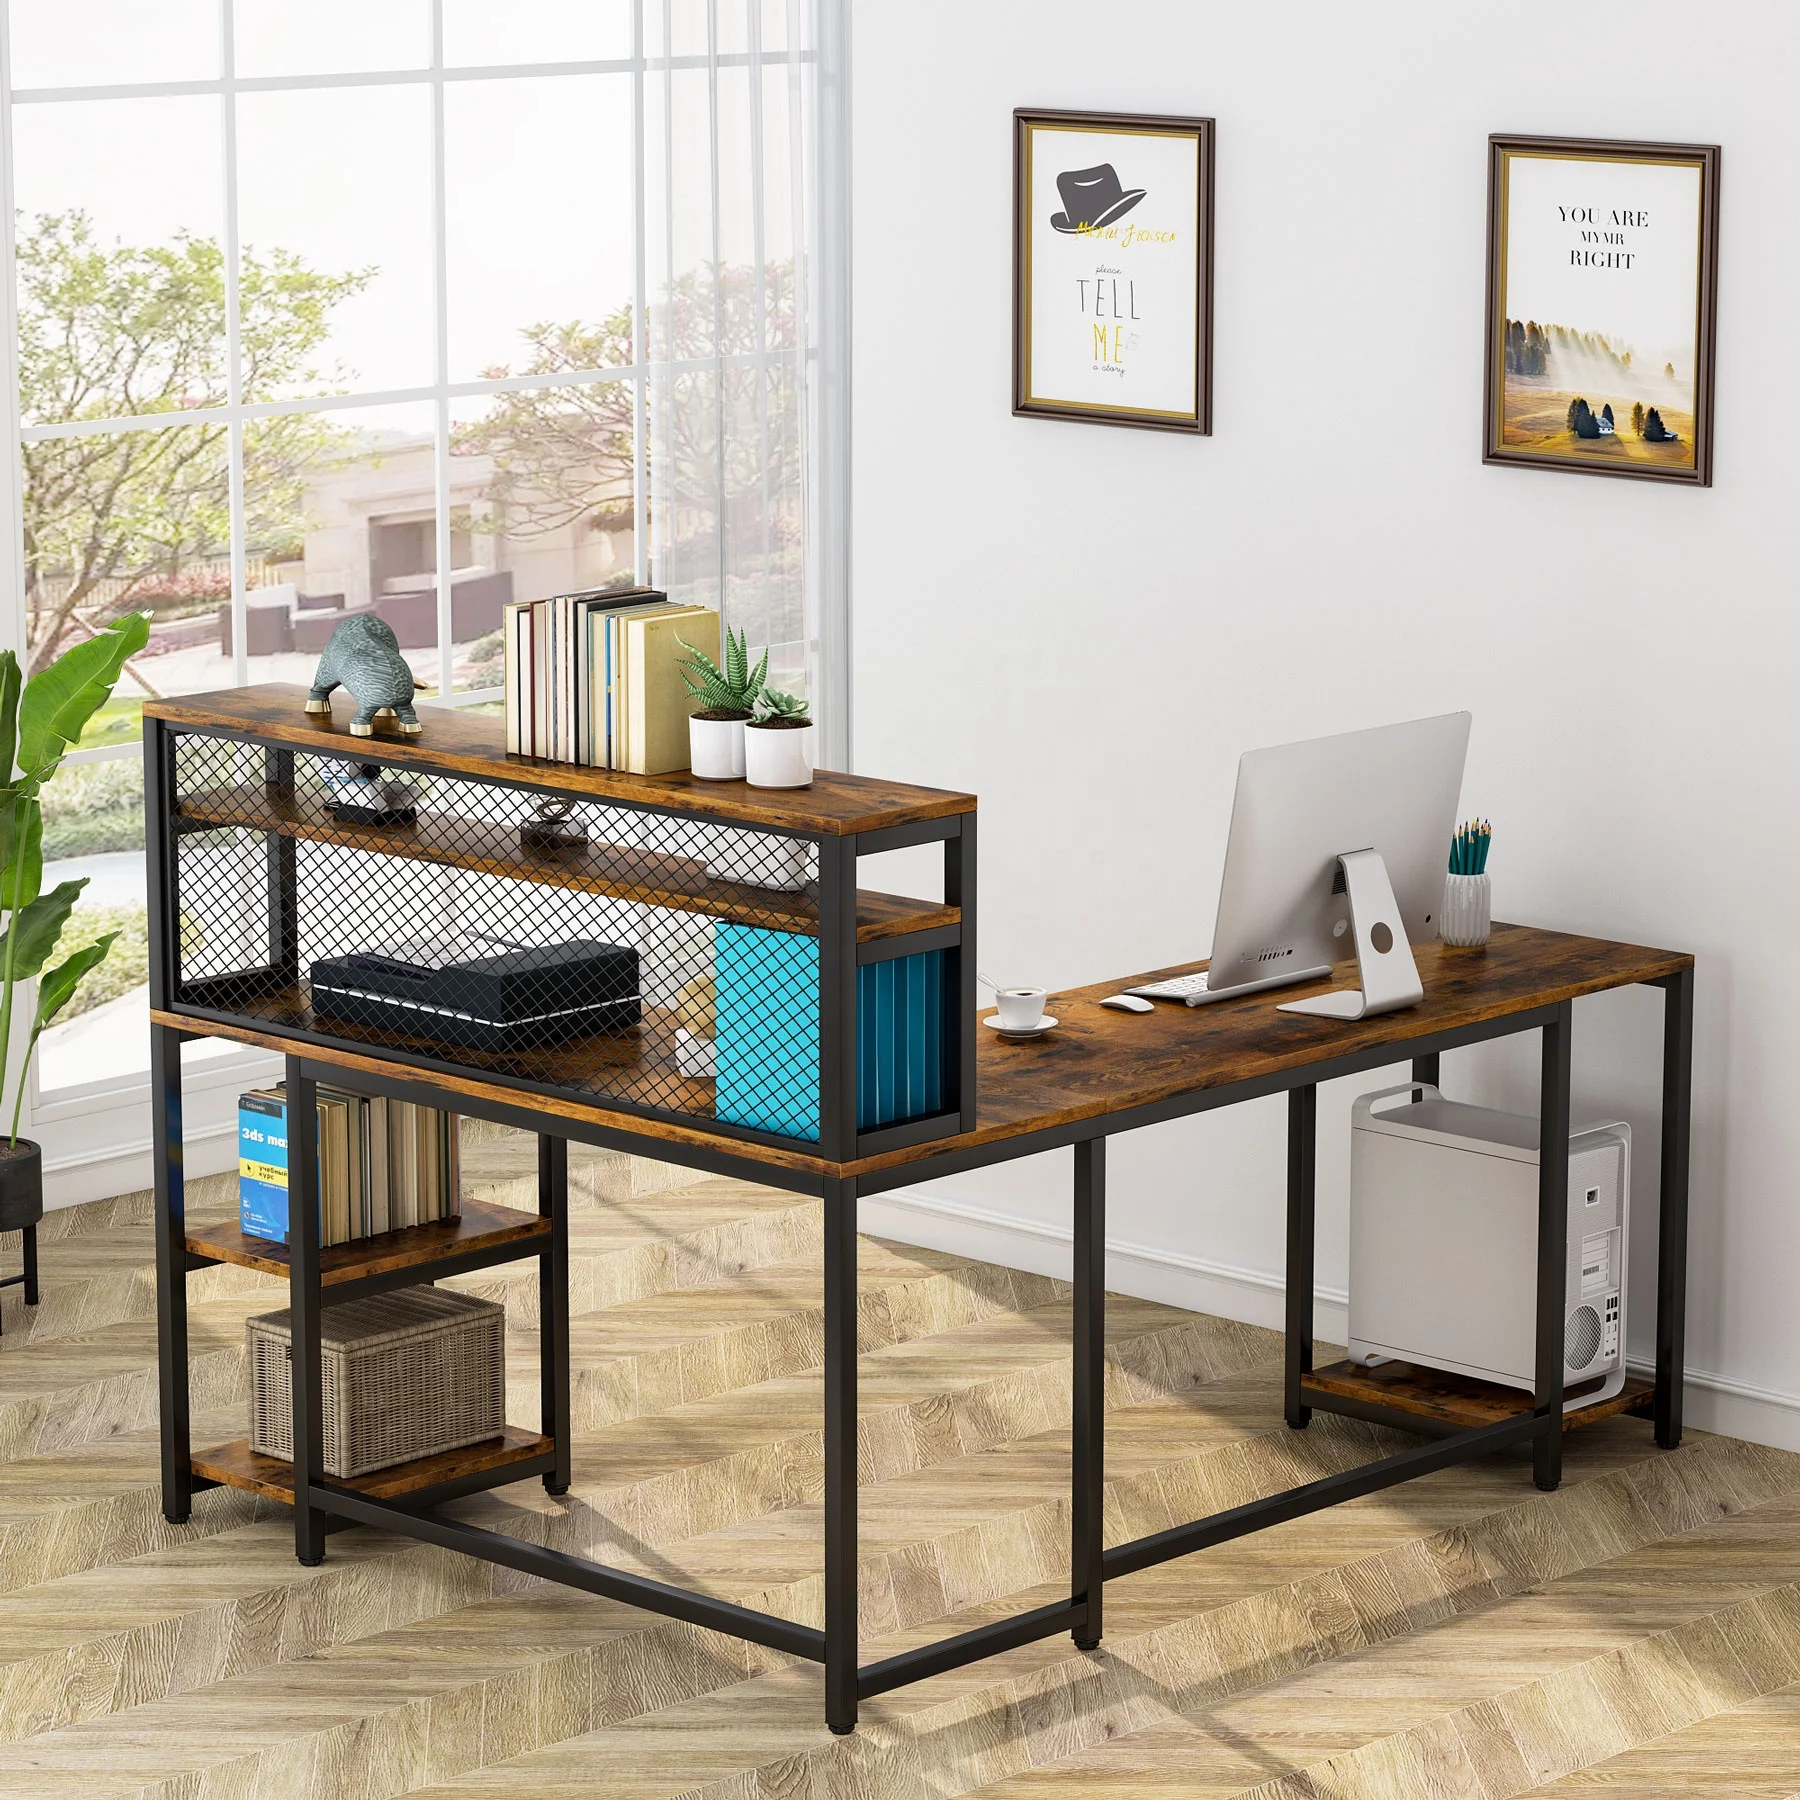 67 inch L Shaped Home Office Corner Motorize Computer Desk Metal Frame Wood Writing PC Laptop Study Table with Hutch Bookshelf